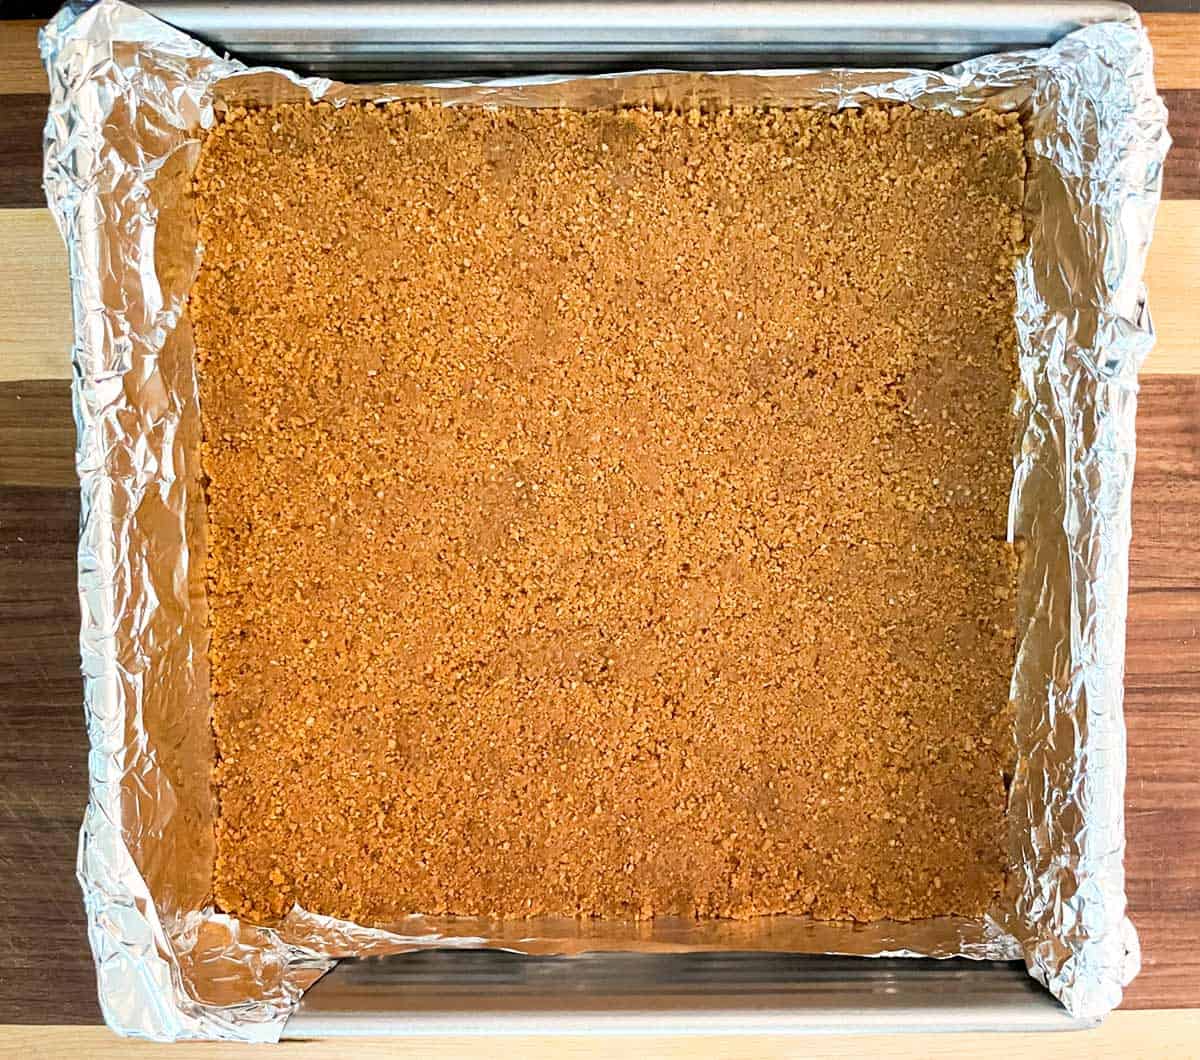 Pressed graham cracker crust onto a foil lined square baking pan.